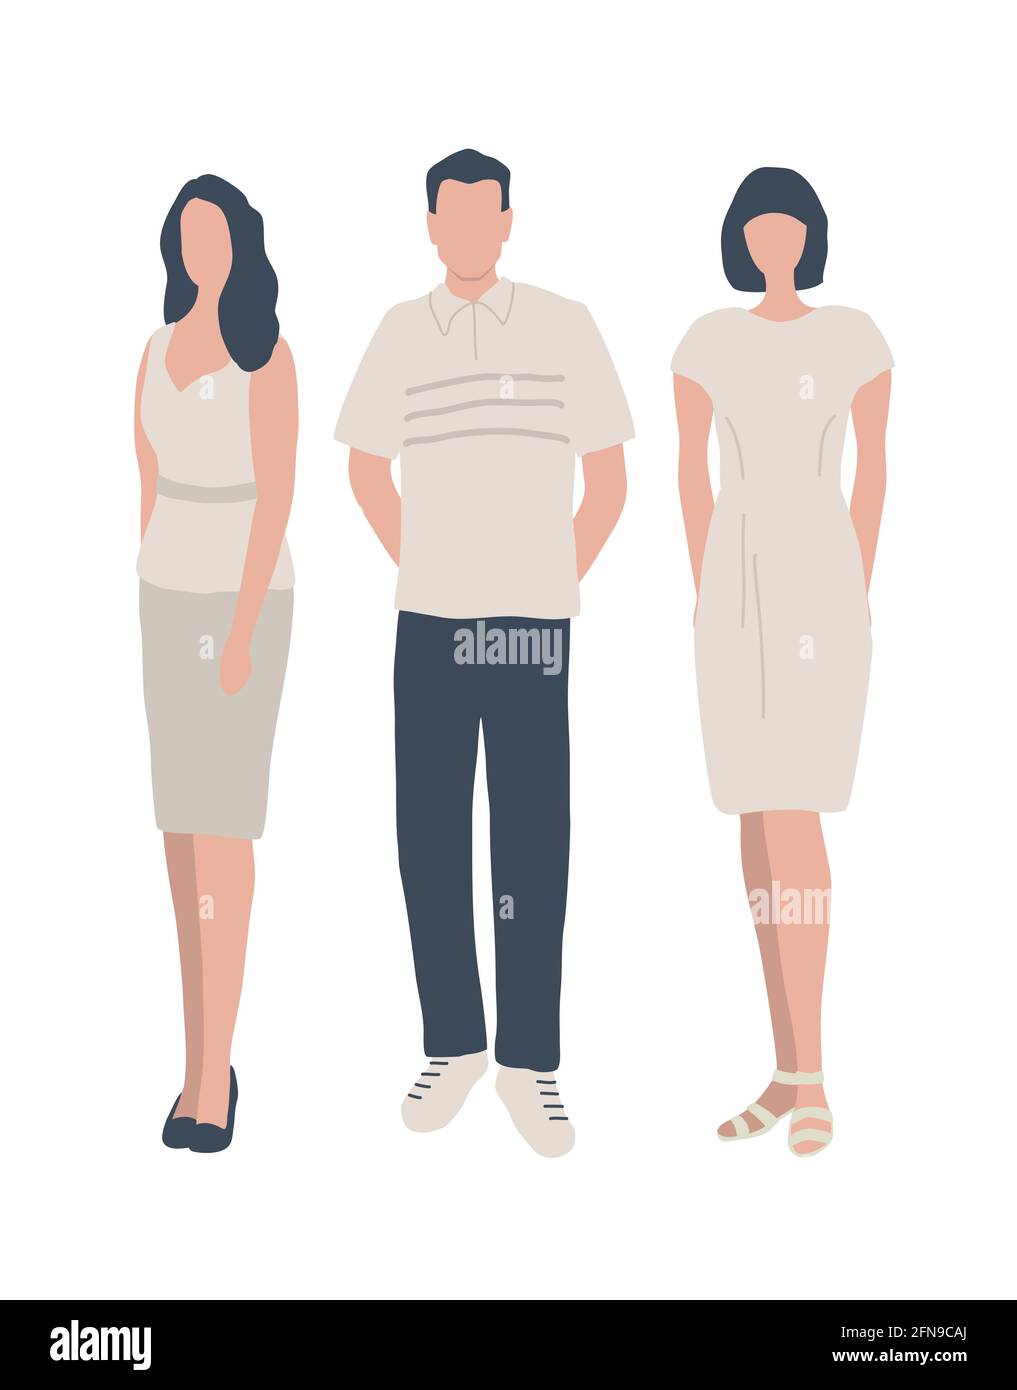 Group of young people. Three different images: clothing style, shoes, hairstyles. Silhouettes of man and women. Vector illustration in beige colors. Stock Vector